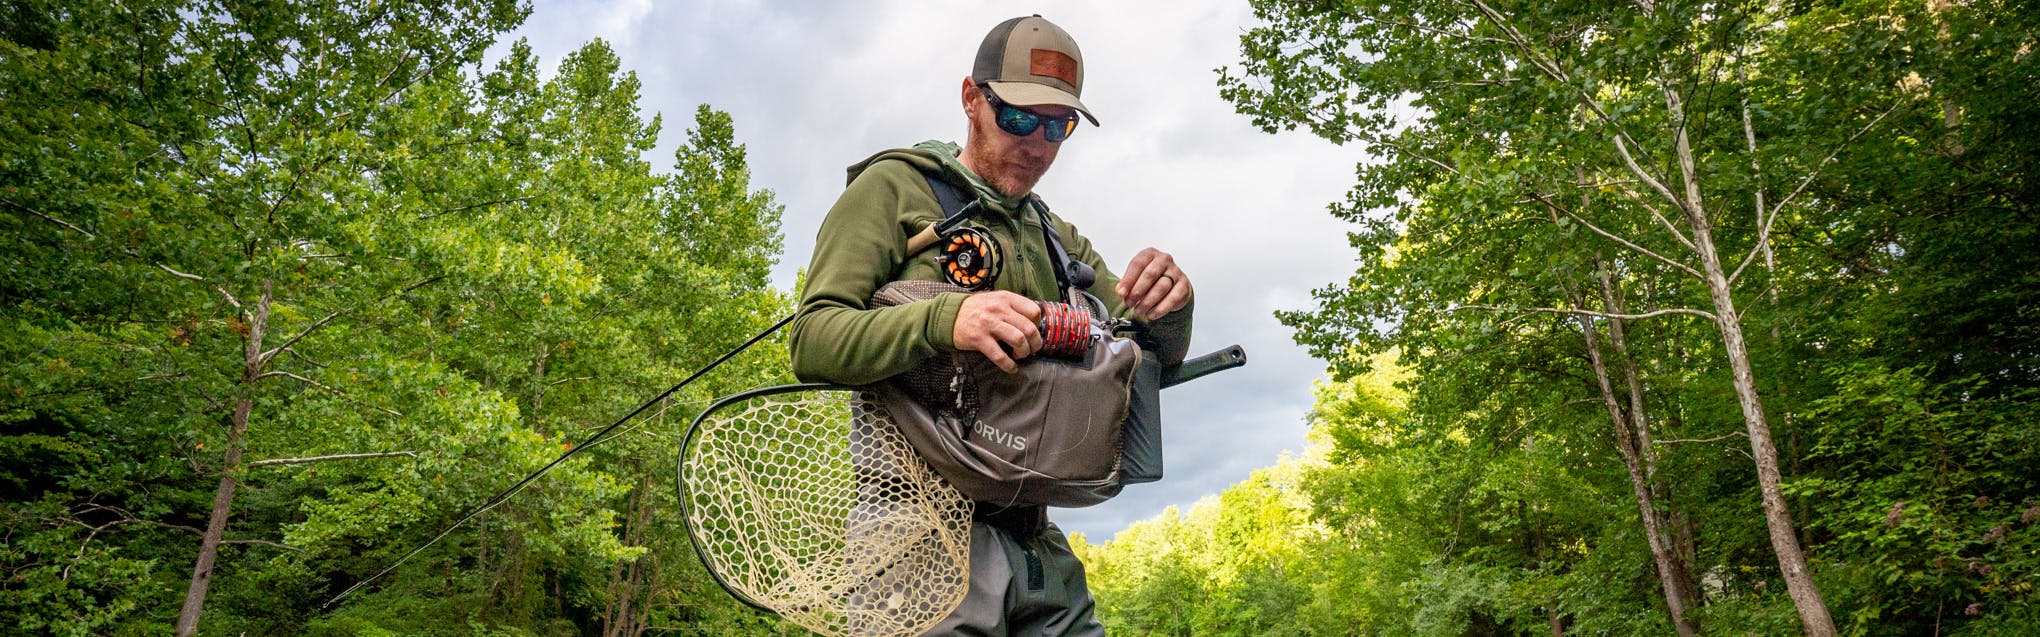 Best Fly Fishing Brands | Curated.com